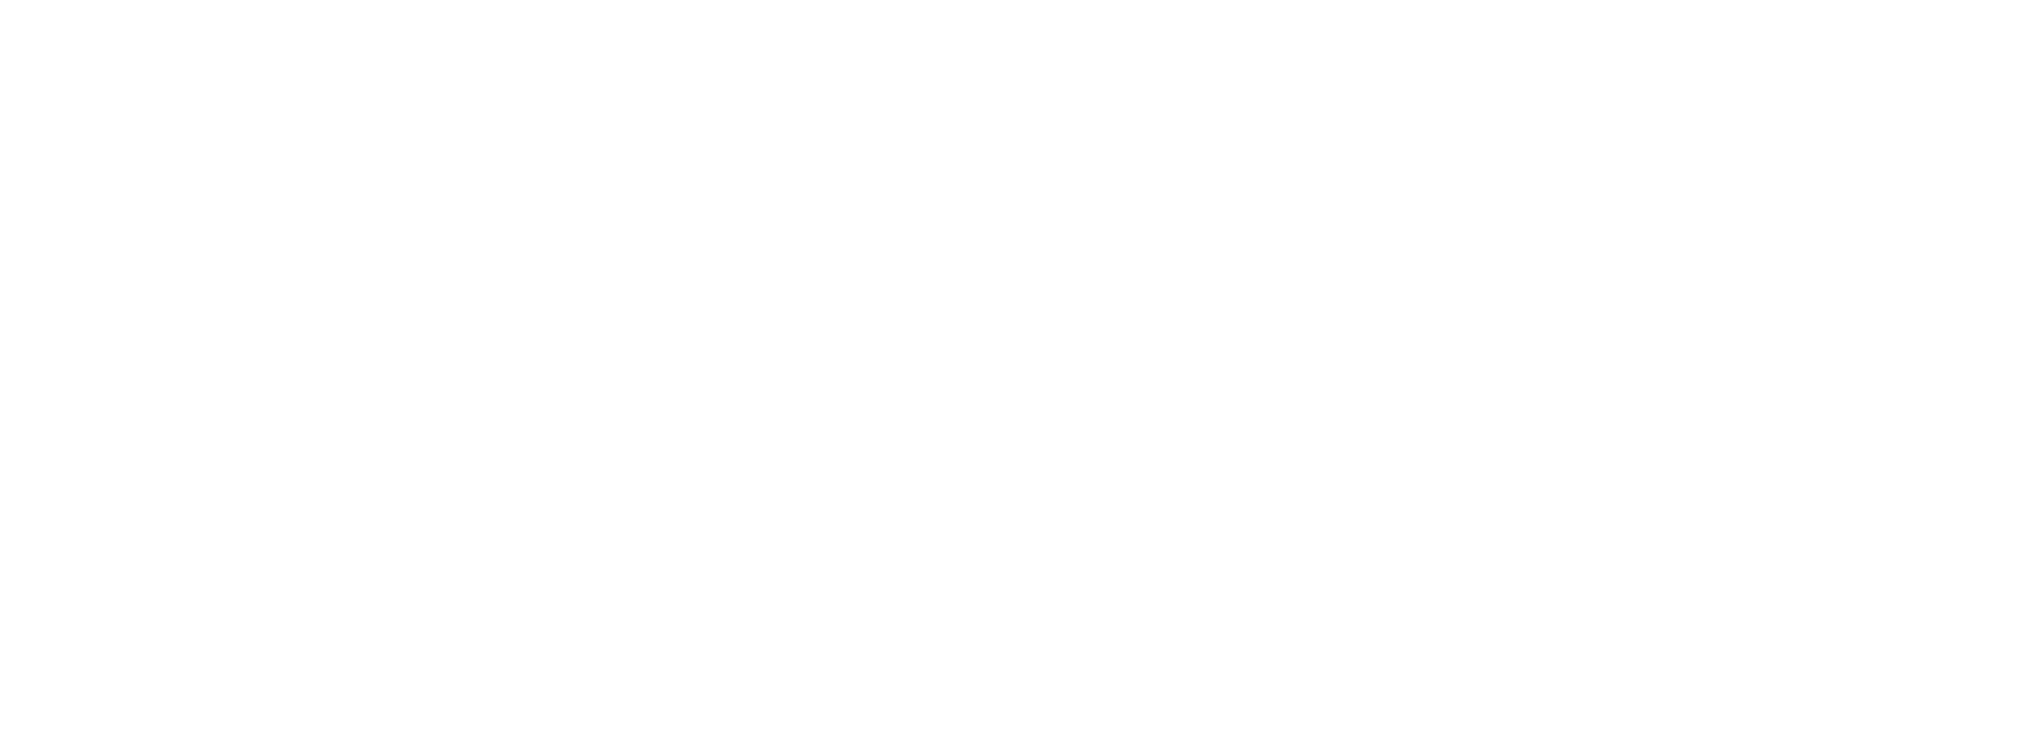 Learning Design and Technology